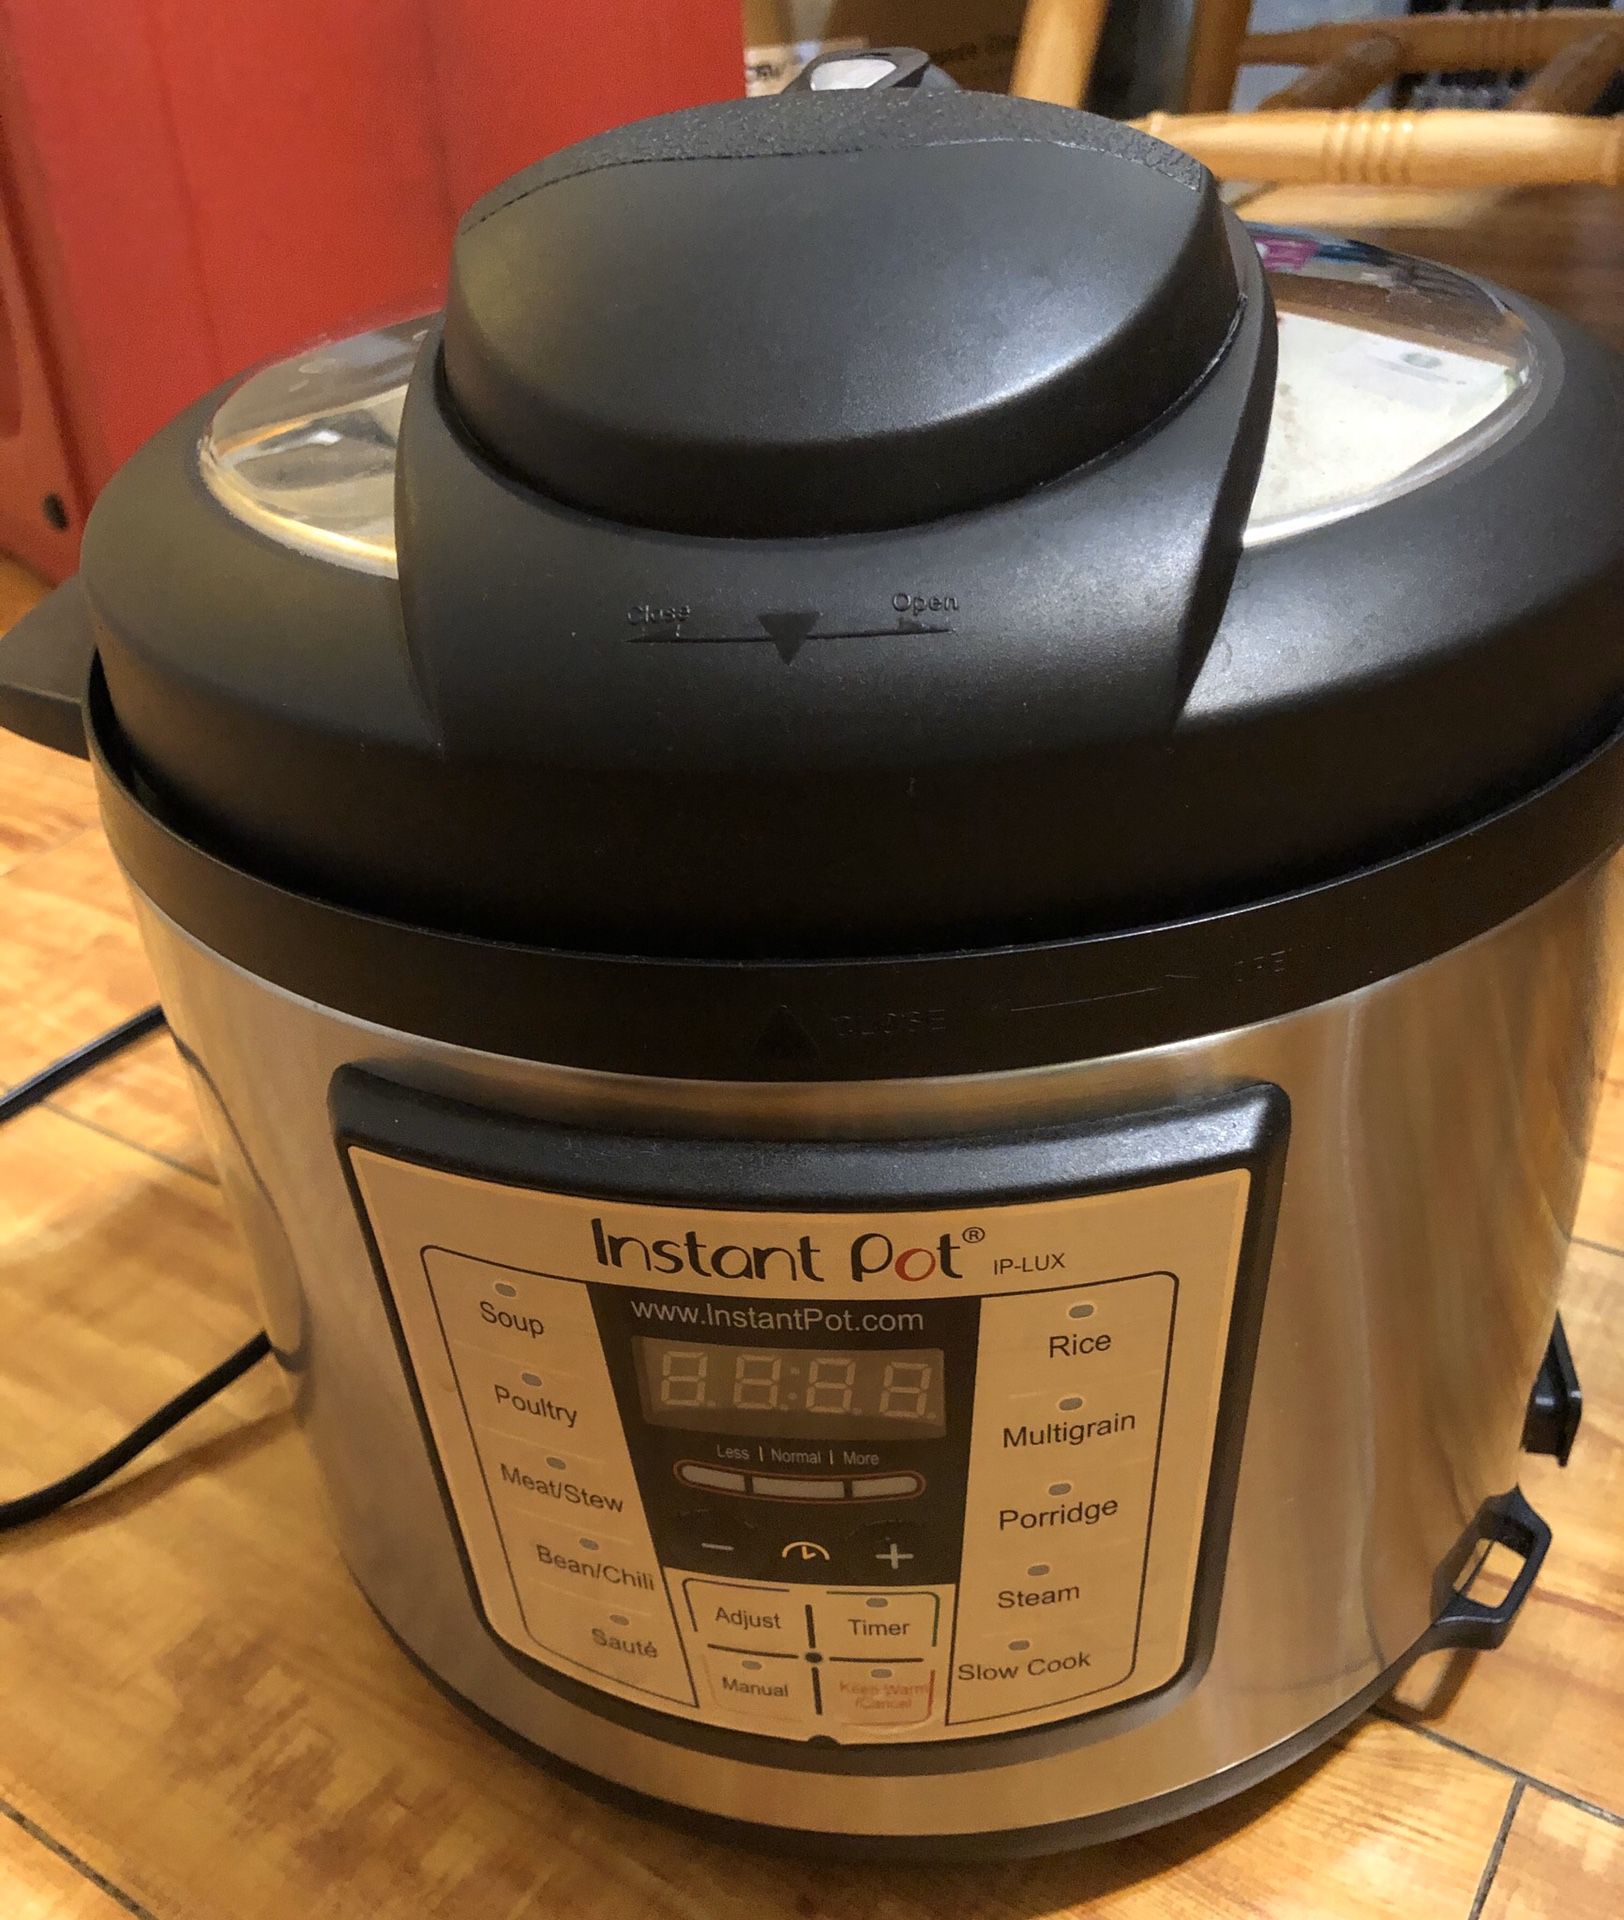 Free Instant pot (not working, for parts)